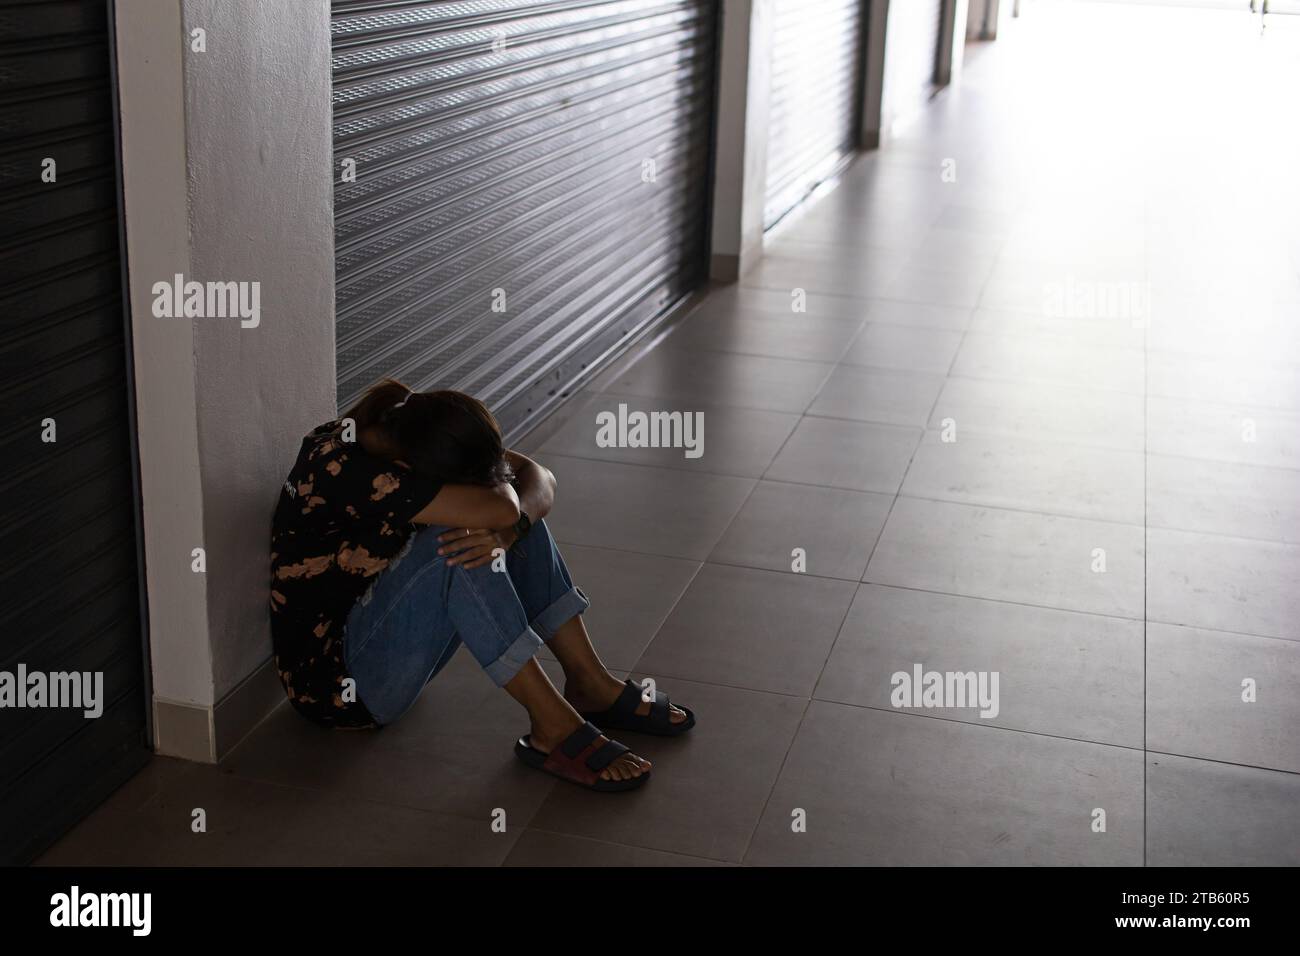 A sad and depressed woman sitting on the floor with her head down, sad mood, feeling tired, lonely and unhappy. spot focus Stock Photo